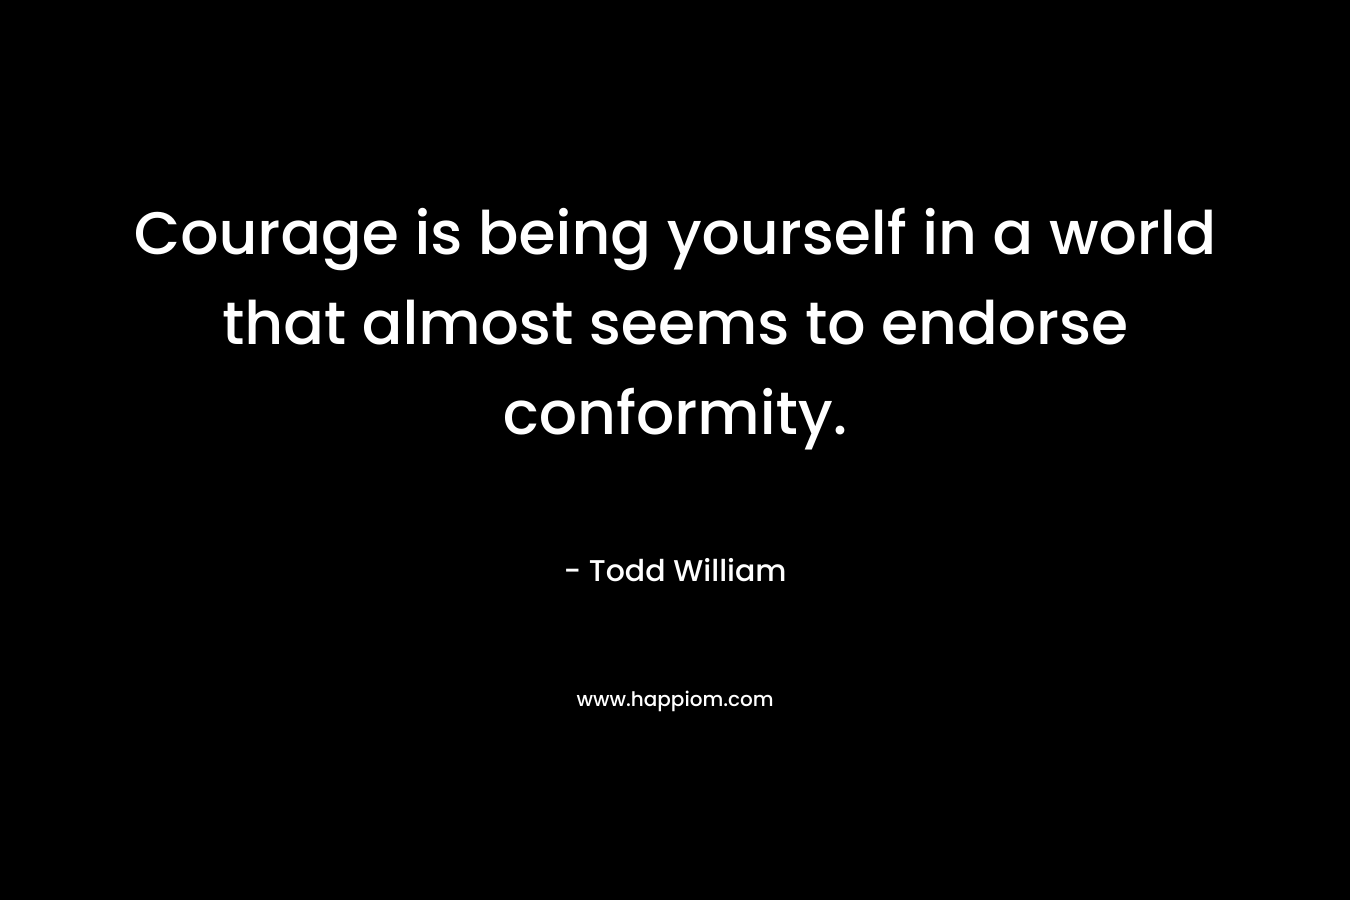 Courage is being yourself in a world that almost seems to endorse conformity.